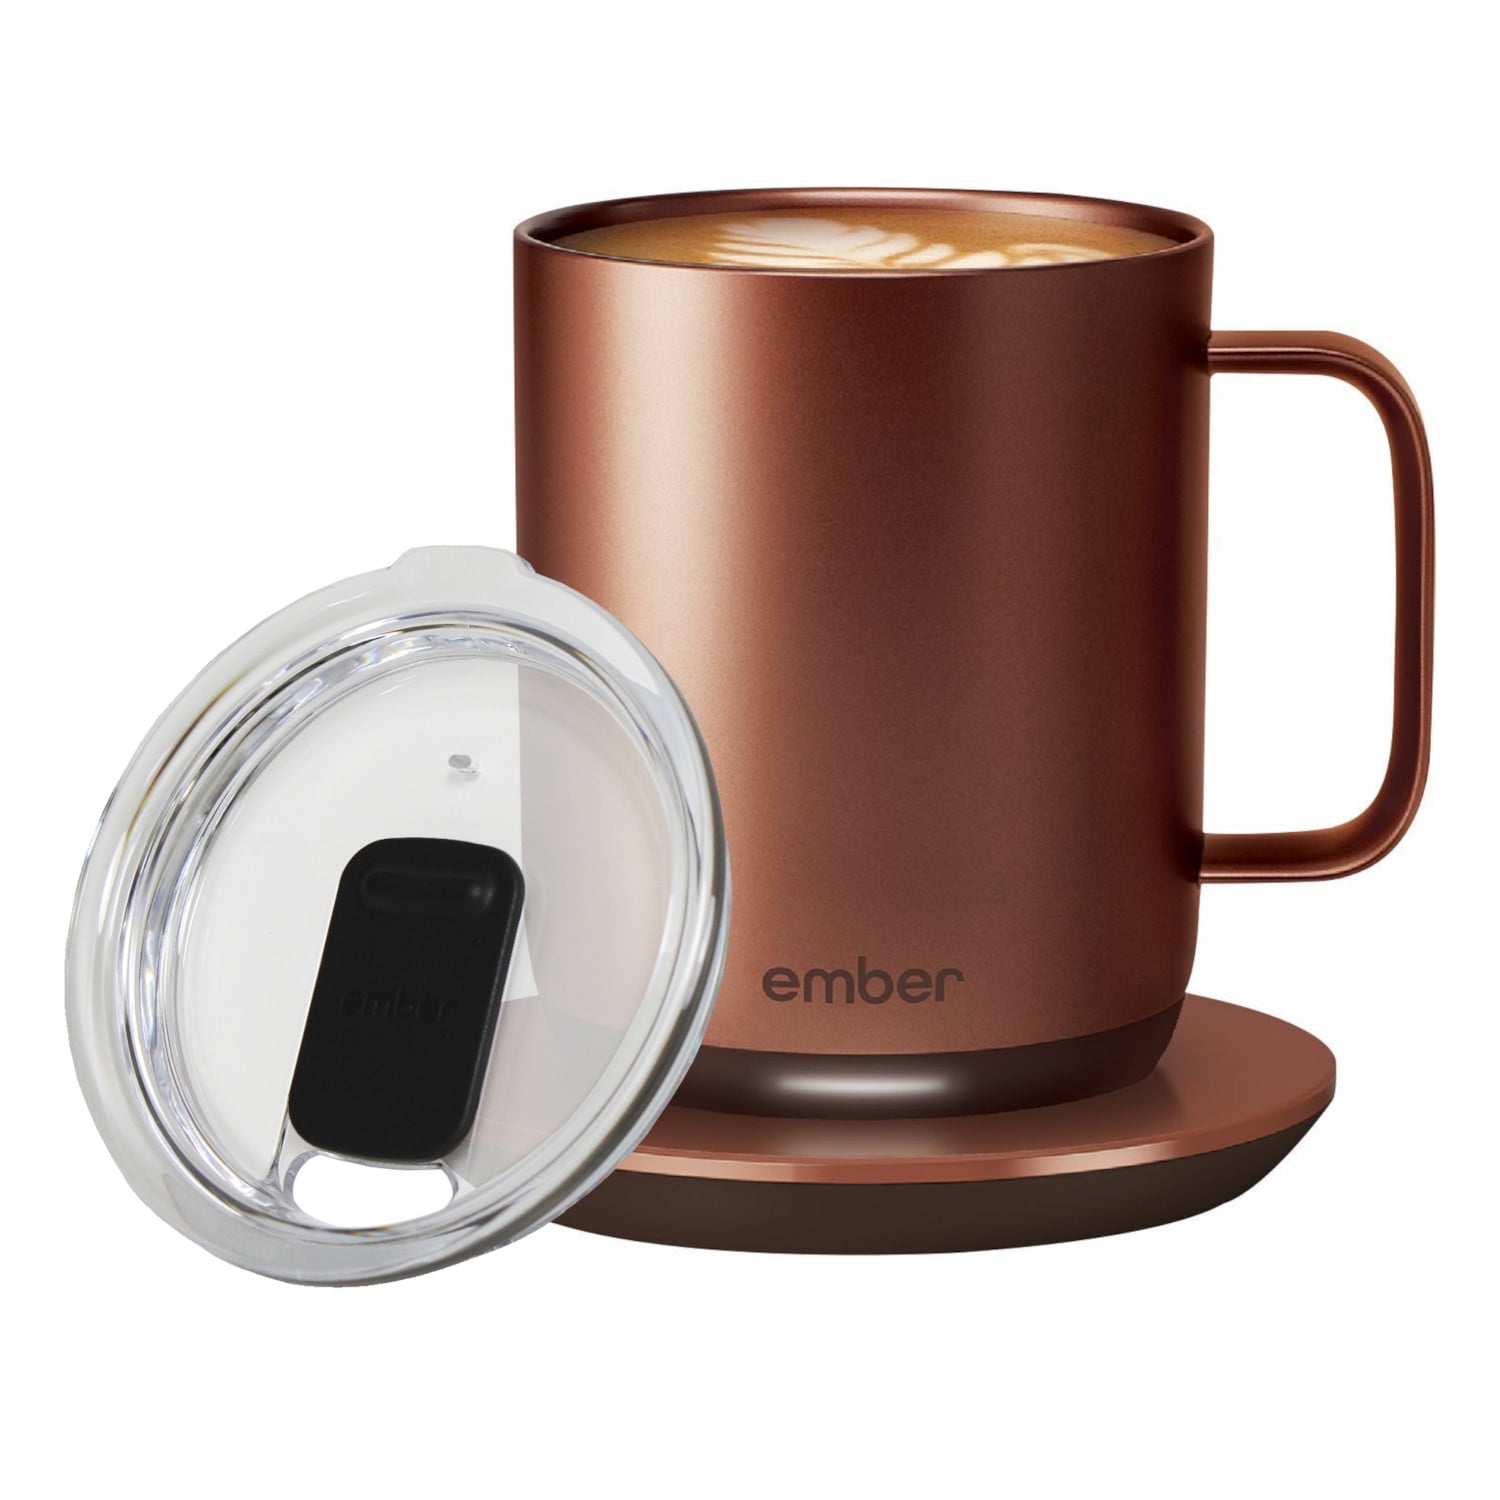 The Ember Smart Mug will keep your beverages warm—and it's on sale